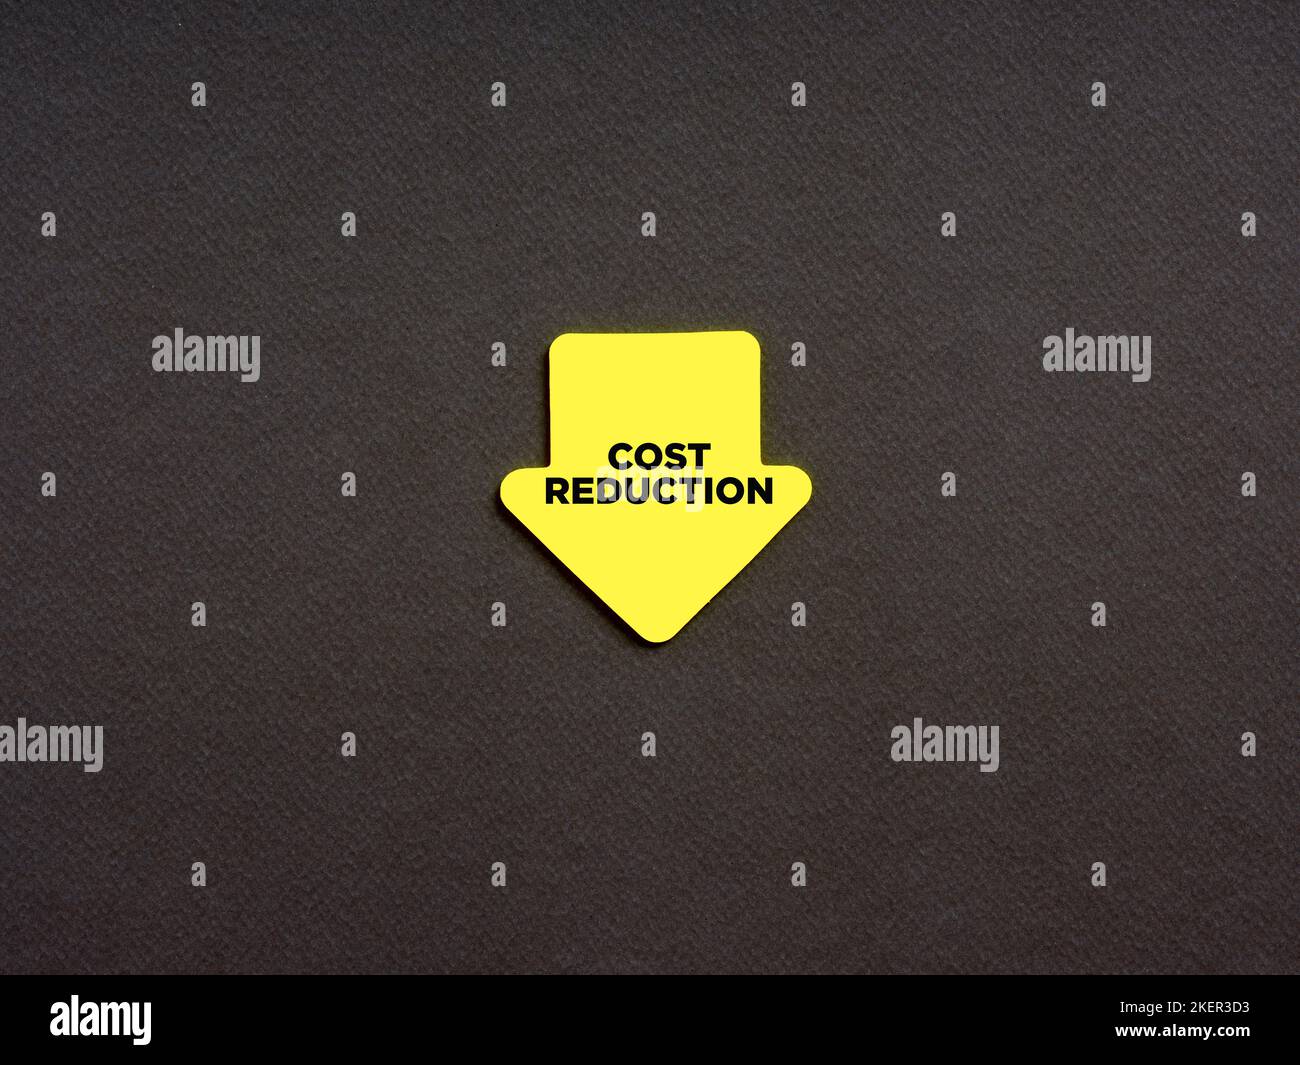 Cost reduction in business and finance concept. The word cost reduction on an arrow shaped note paper. Stock Photo